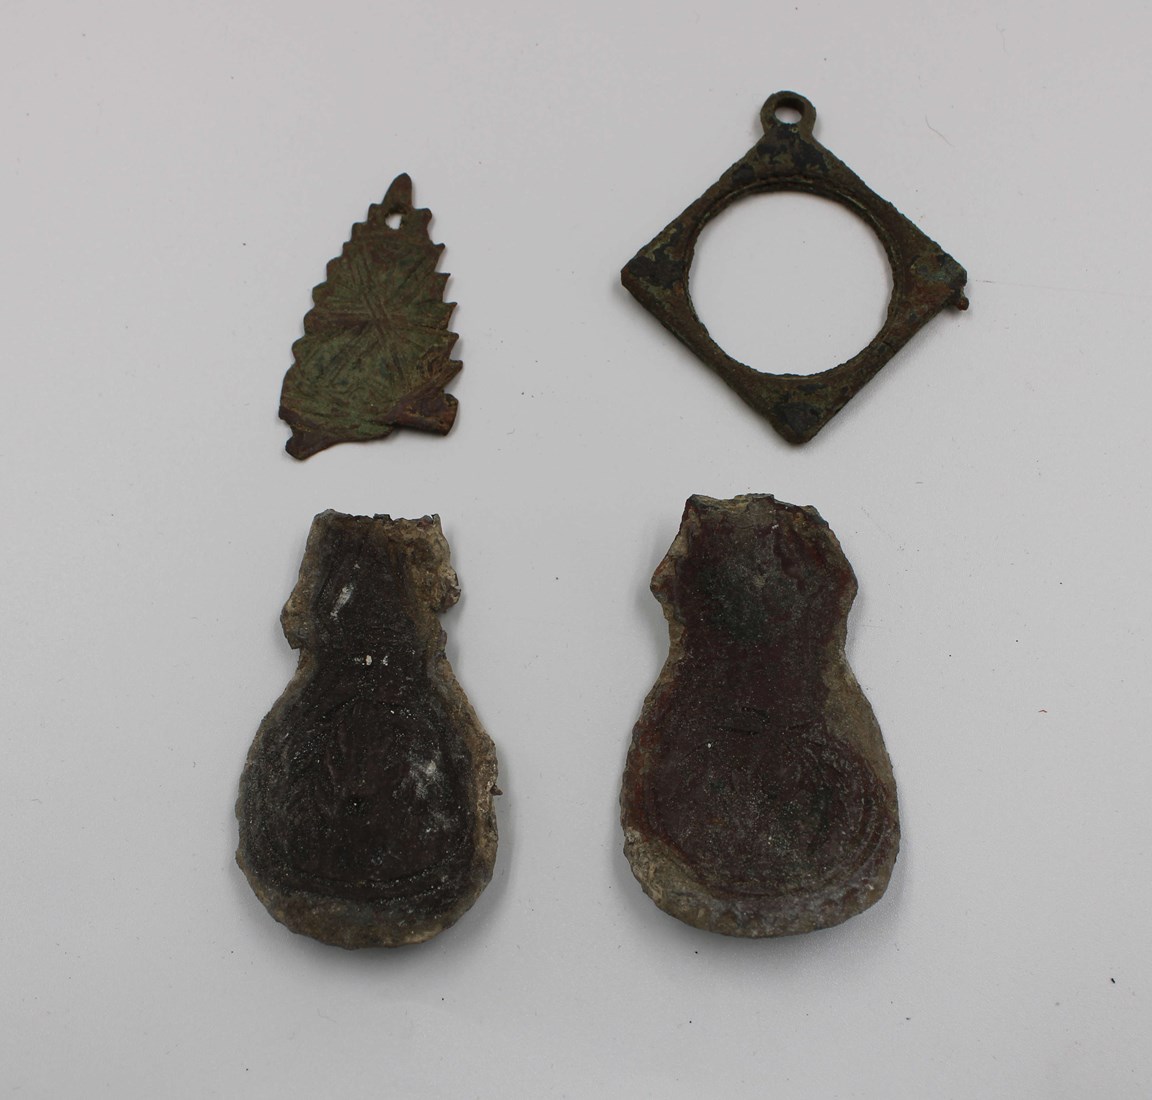 Four metal objects - probable harness ornaments